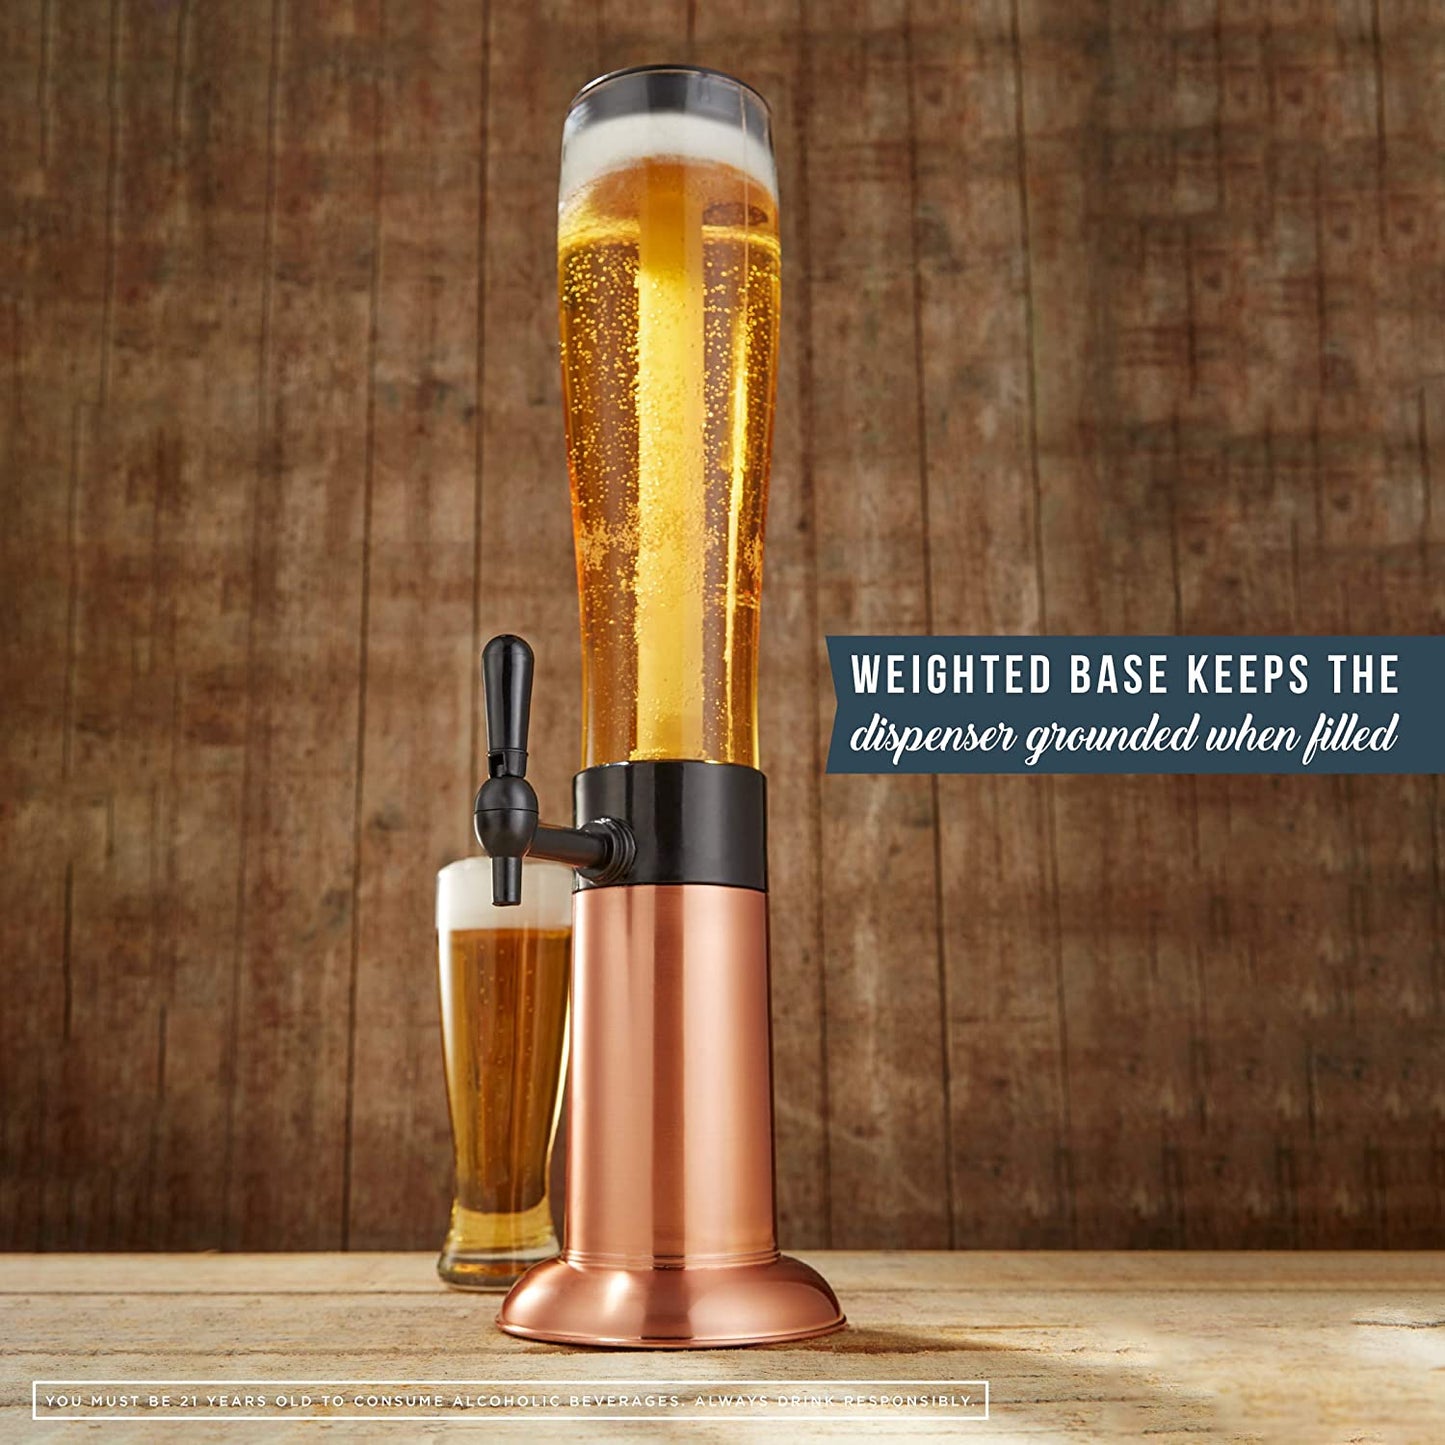 Beer Tower Drink Dispenser with Pro-Pour Tap and Freeze Tube to Keep Beverages Ice Cold, Perfect for Parties and Gameday, Home Bar Accessories, 2.75 Qt./2.6 L, Copper Finish, Holiday Gift